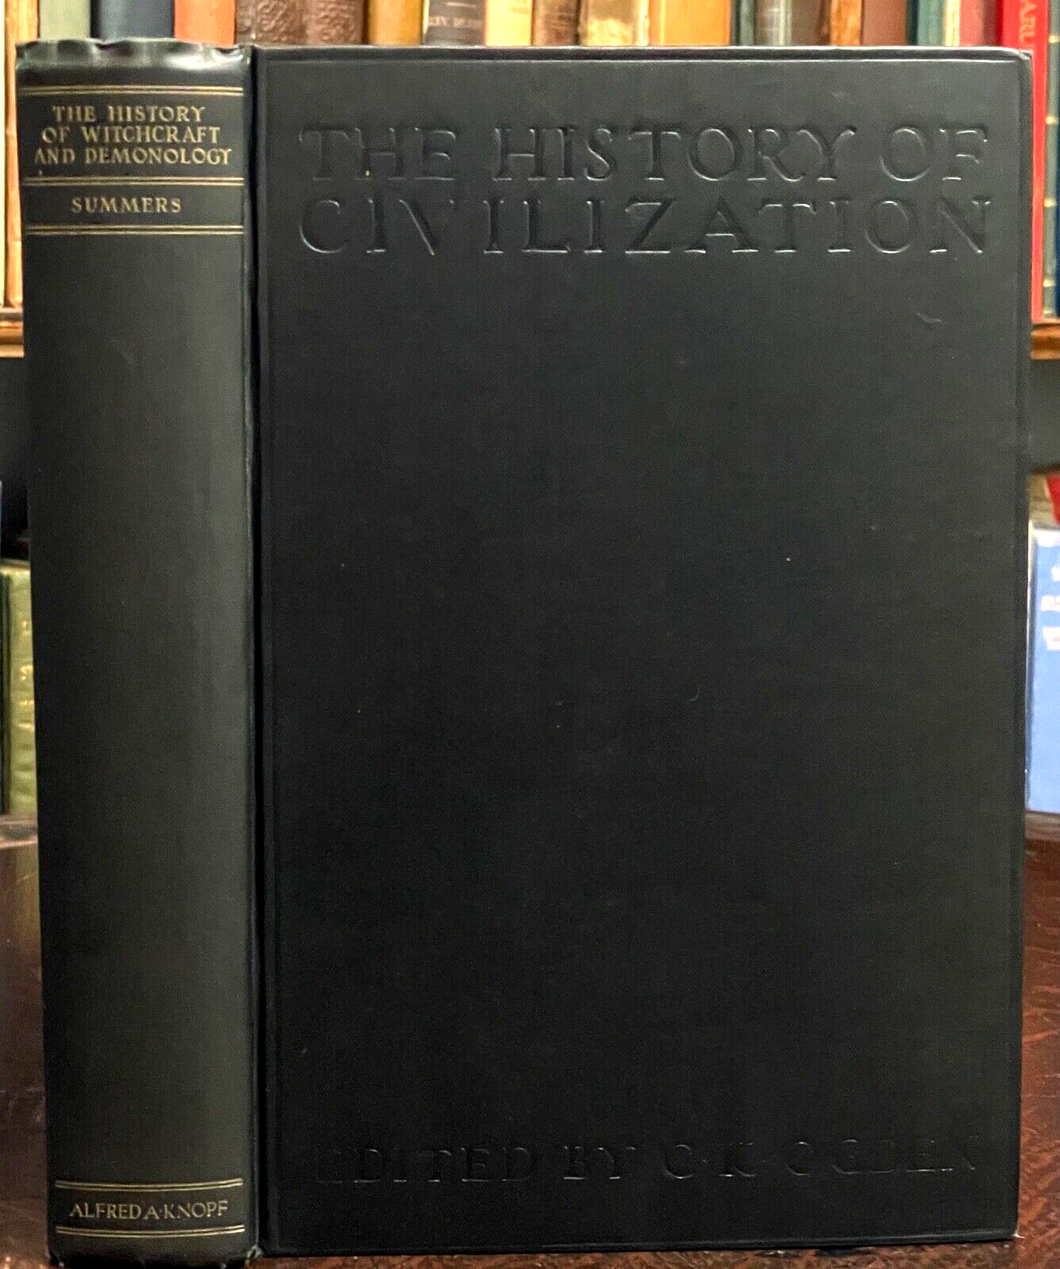 HISTORY OF WITCHCRAFT AND DEMONOLOGY - Summers, 1st 1926 - WITCHES DEMONS MAGICK